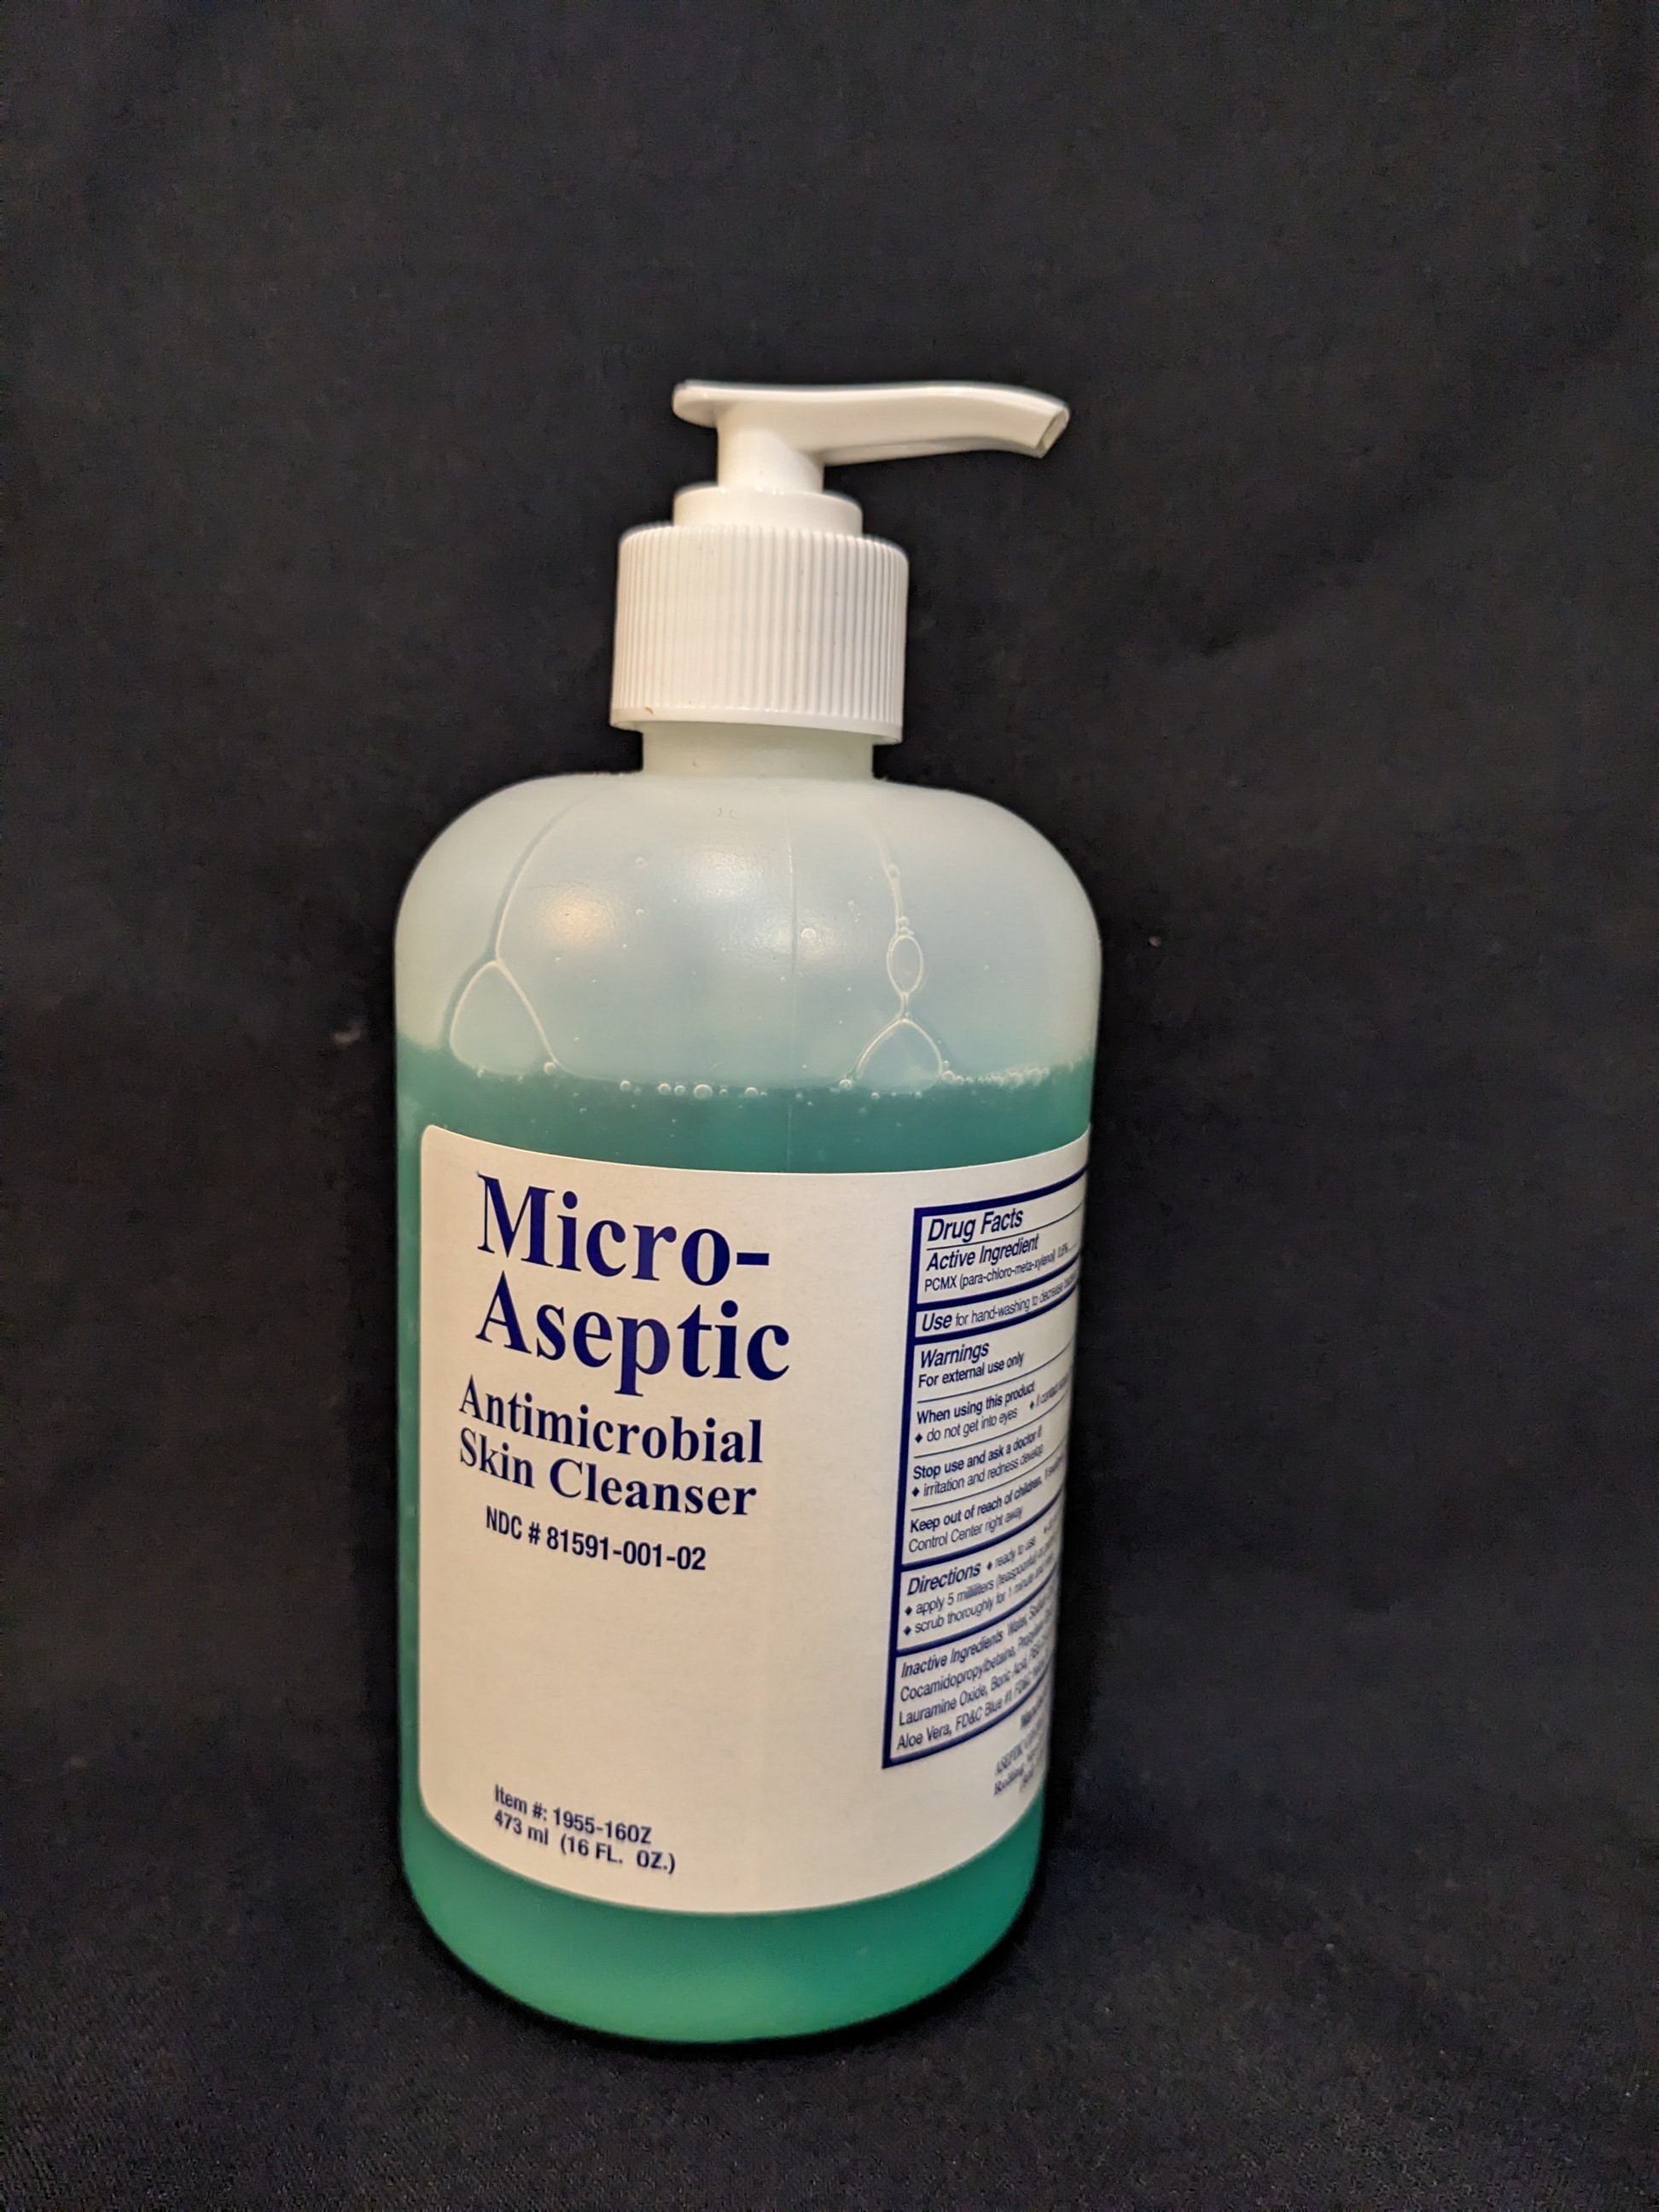 Antimicrobial Skin Cleanser, 16oz Bottle